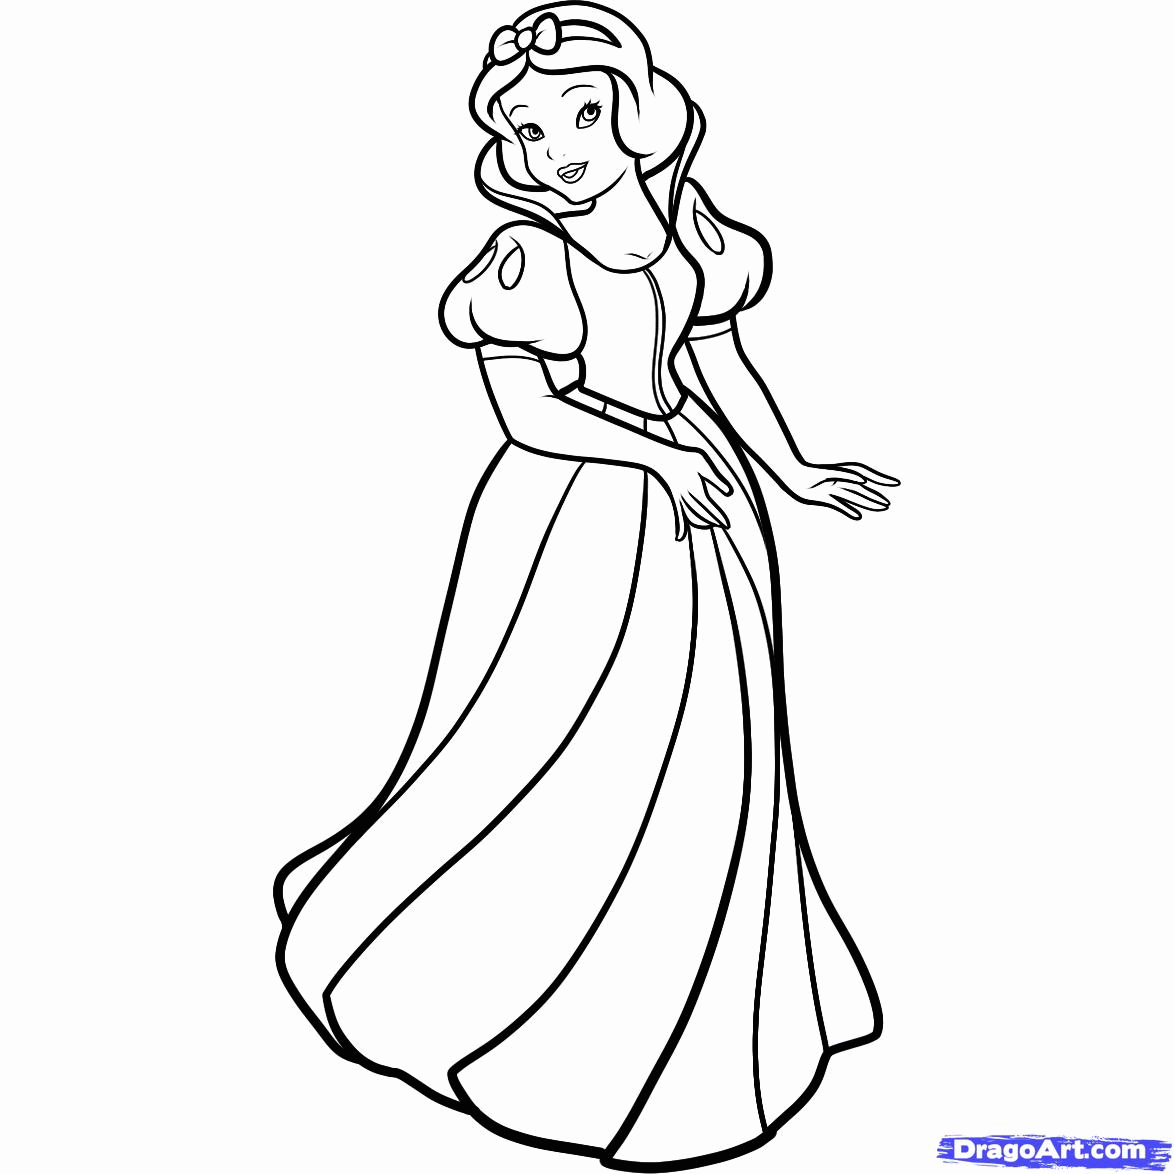 6 Pics of Snow White And Black Coloring Pages - Disney Princess ...